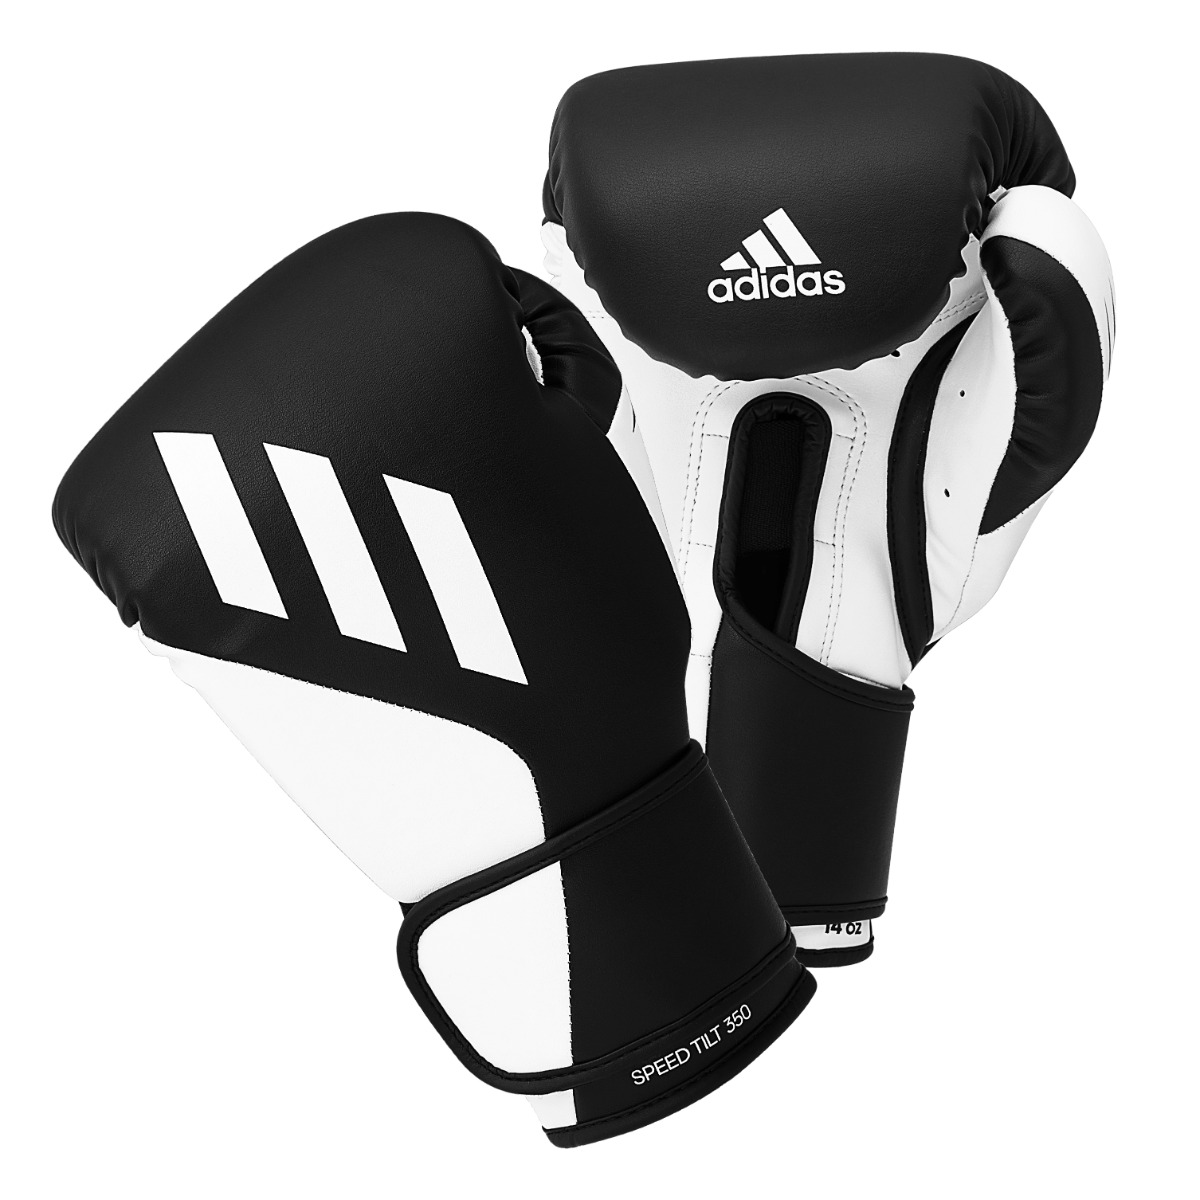 Adidas Speed Tilt 350 Boxing Gloves - Black/White - Click Image to Close